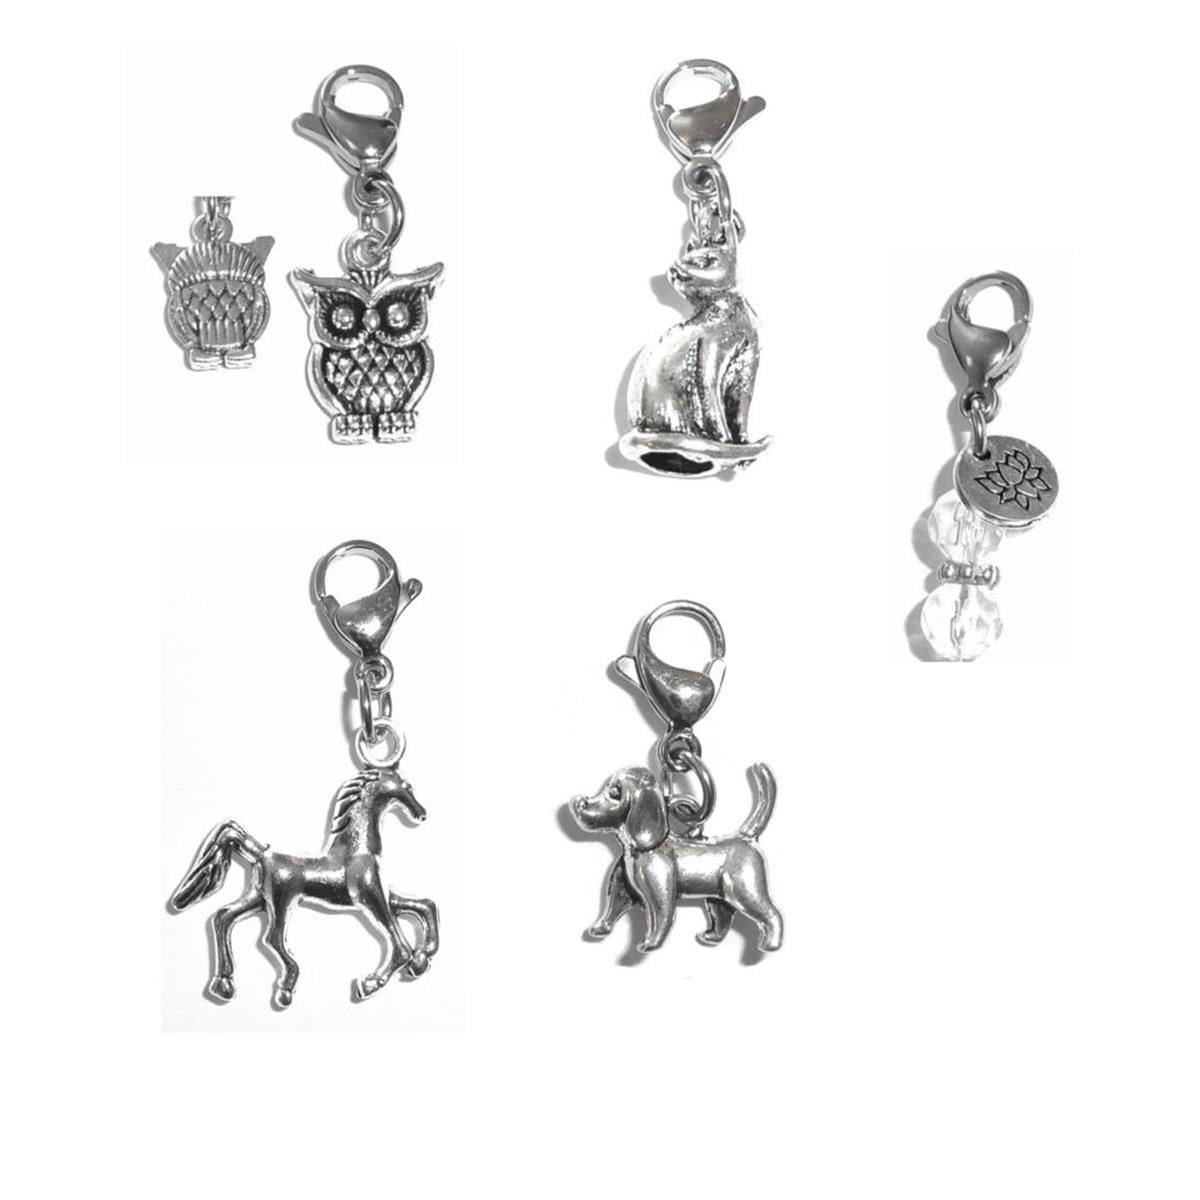 Keyzone 100 Pieces Silver Mixed Animals Styles Charms Pendants DIY for Necklace Bracelet Jewelry Making 